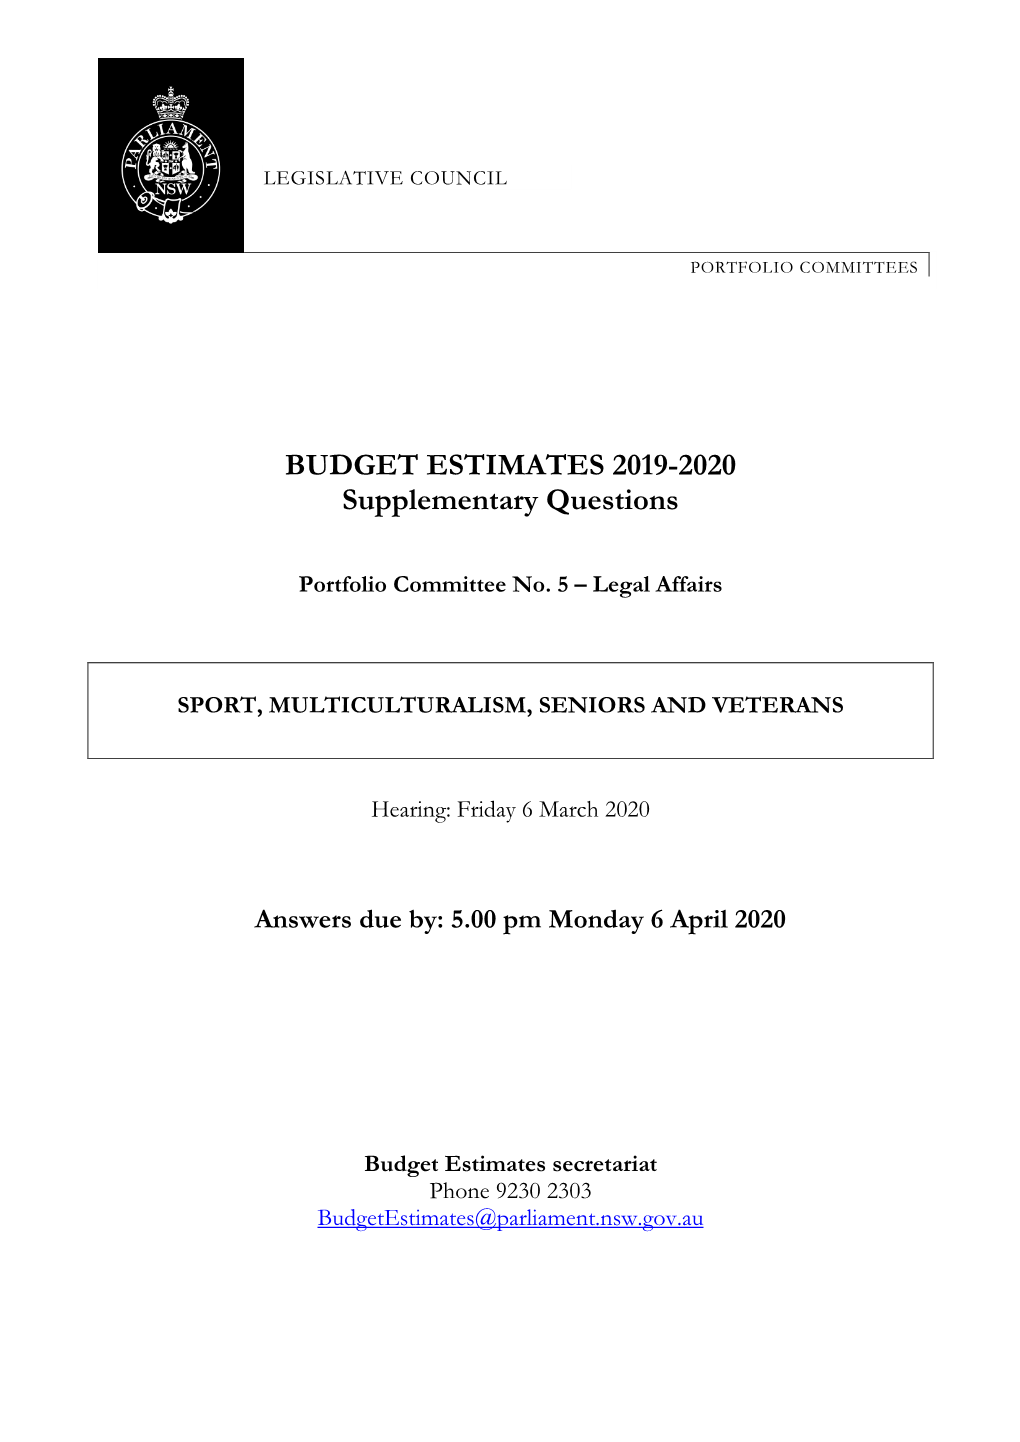 BUDGET ESTIMATES 2019-2020 Supplementary Questions